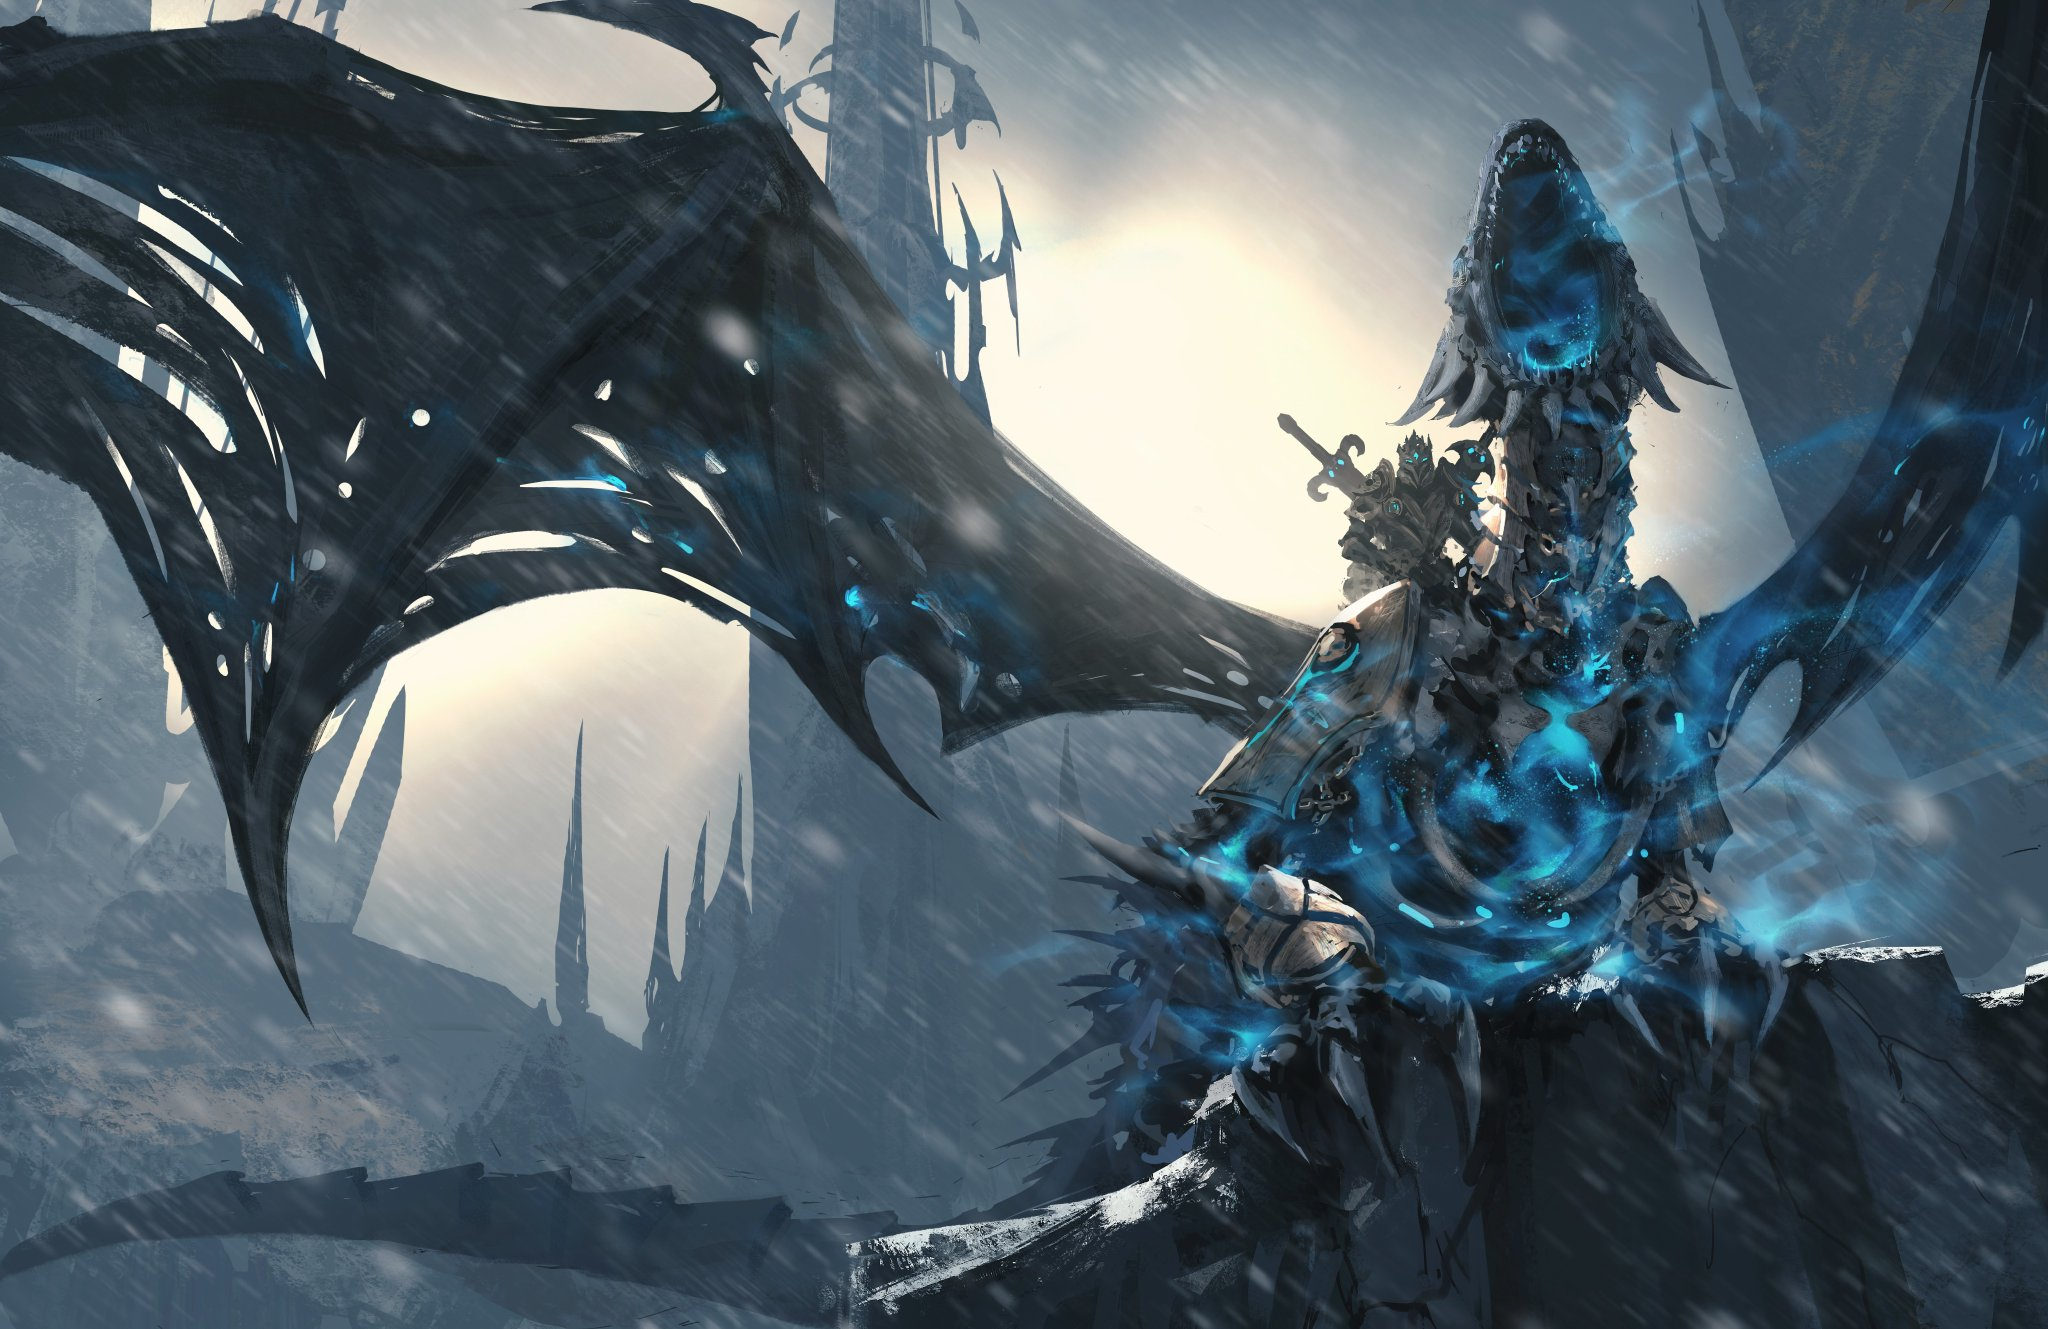 2048x1329 50+ World Of Warcraft: Wrath Of The Lich King HD Wallpapers and Backgrounds